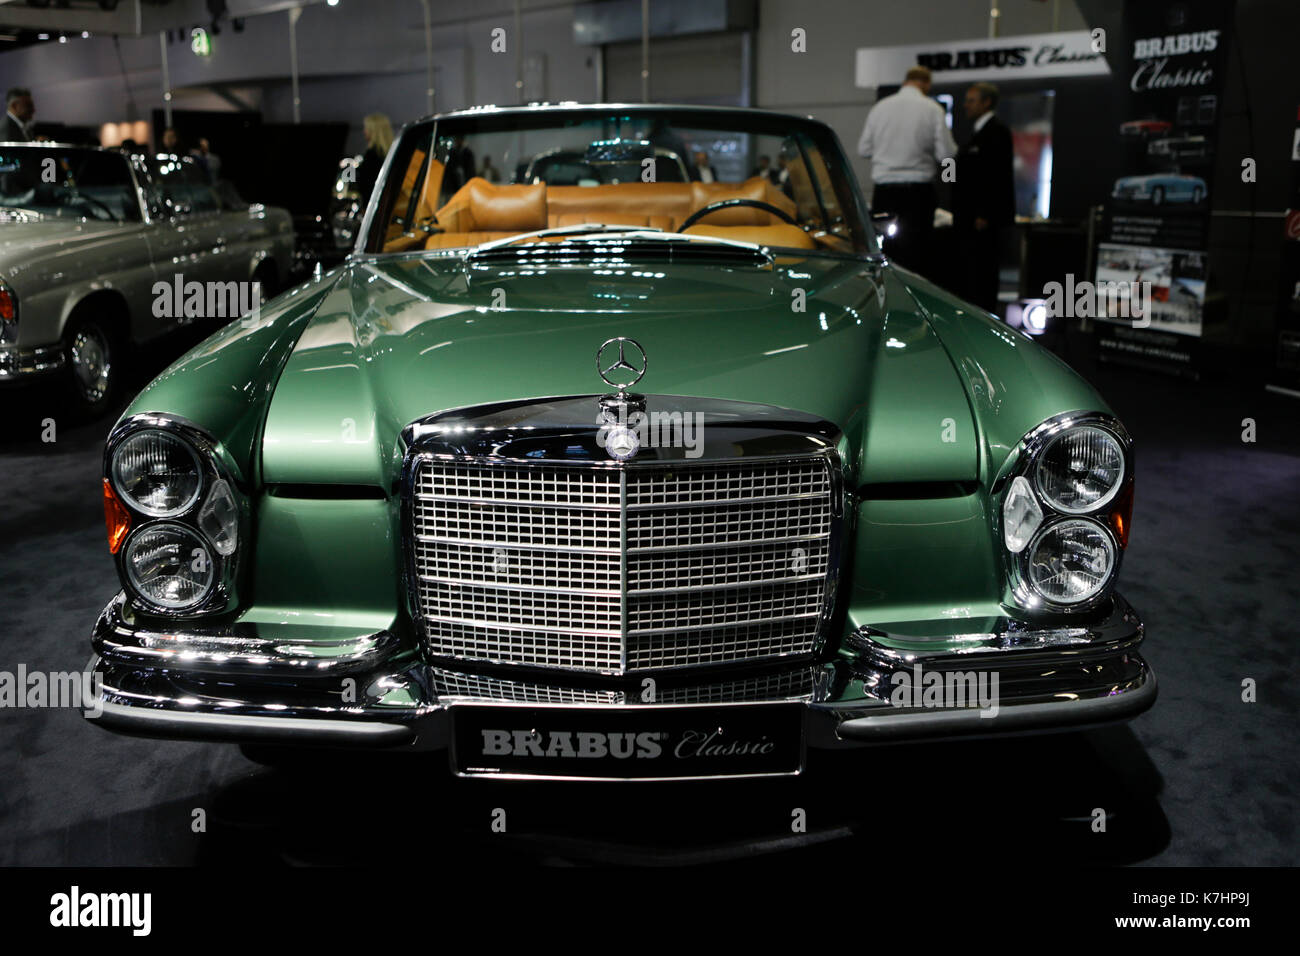 Frankfurt, Germany. 15th September 2017. The German car tuner Brabus Classic presents the Mercedes-Benz 280 SE at the 67. IAA. The 67. Internationale Automobil-Ausstellung (IAA in Frankfurt is with over 1000 exhibitors one of the largest Motor Shows in the world. The show will open for the general public from the 16th until the 24th September. Stock Photo